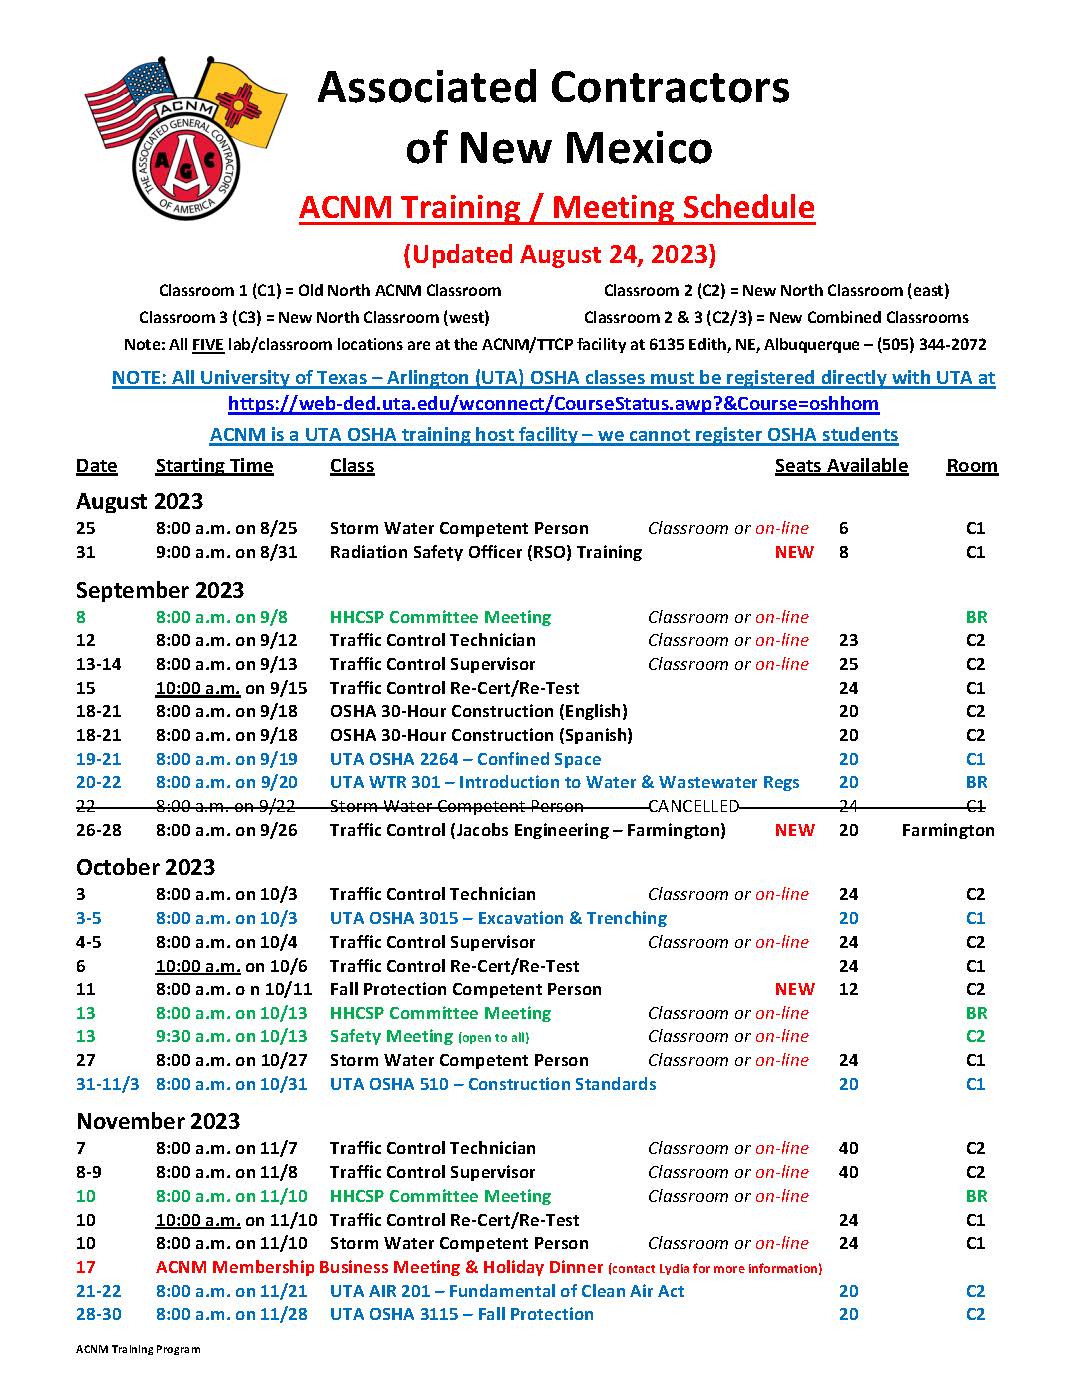 ACNM Training Meeting Schedule - 8-24-23 (1)_Page_1